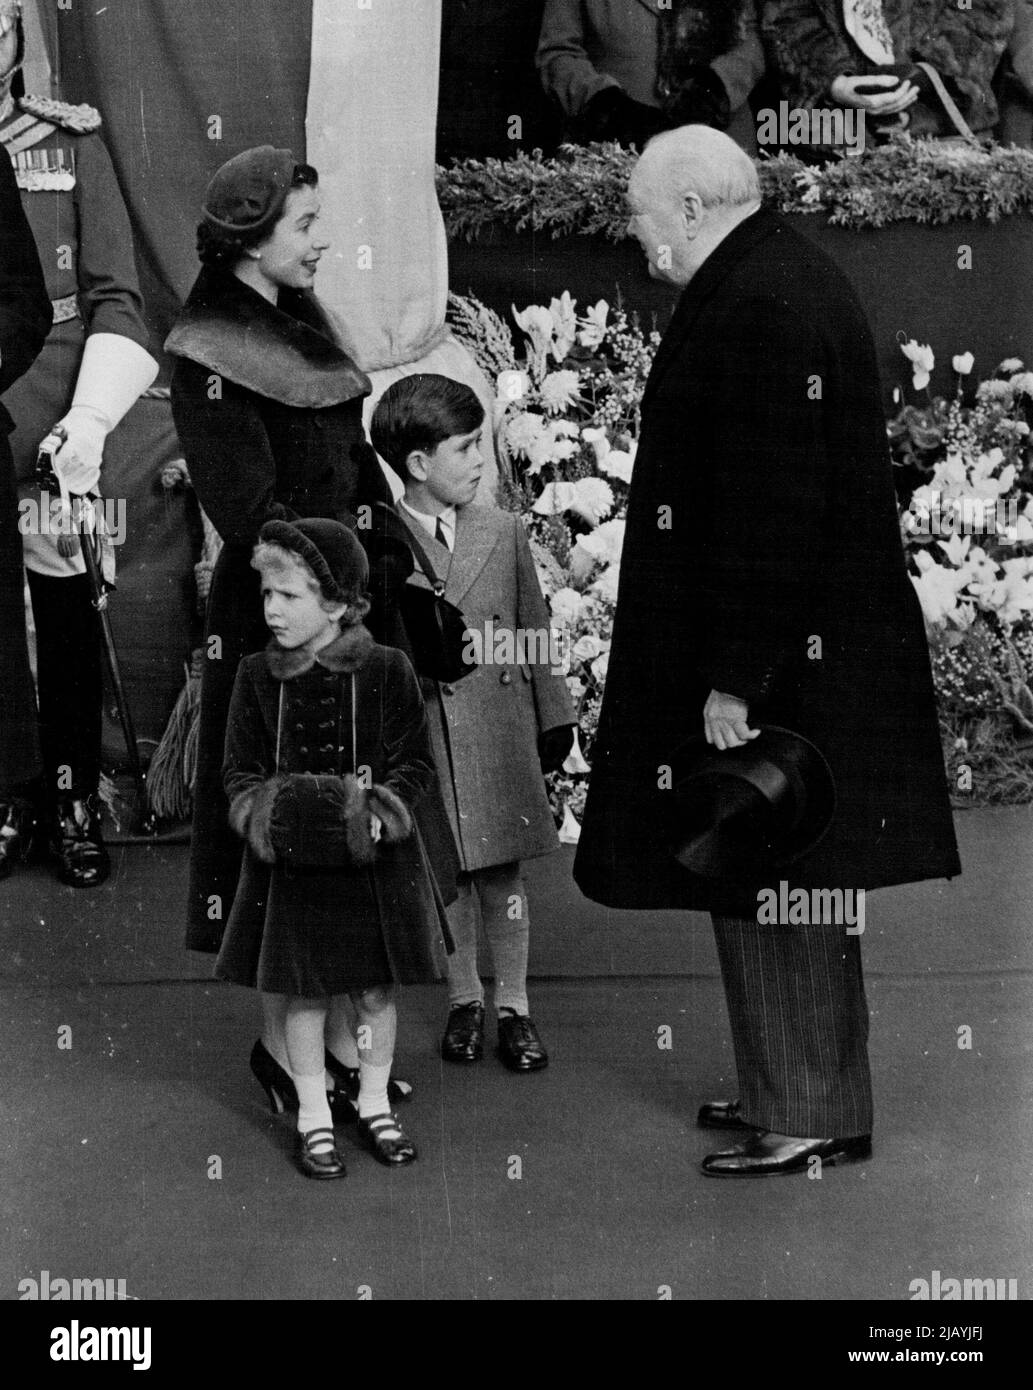 The Queen Mother Comes Home The Queen chats happily with Sir Winston Churchill as with Prince Charles and Princess Anne she awaits the arrival of the Queen mother at Waterloo. Queen Elizabeth the Queen mother arrived at Waterloo station this afternoon from Southampton after her visit to the United States and Canada. She was met at the station by Queen Elizabeth, the Duke of Edinburgh, Prince Charles and Princess Anne who accompanied her to Clarence house. In bright sunshine the royal party drove through cheering crowds in a carriage procession escorted by a Sovereign's escort of the household Stock Photo